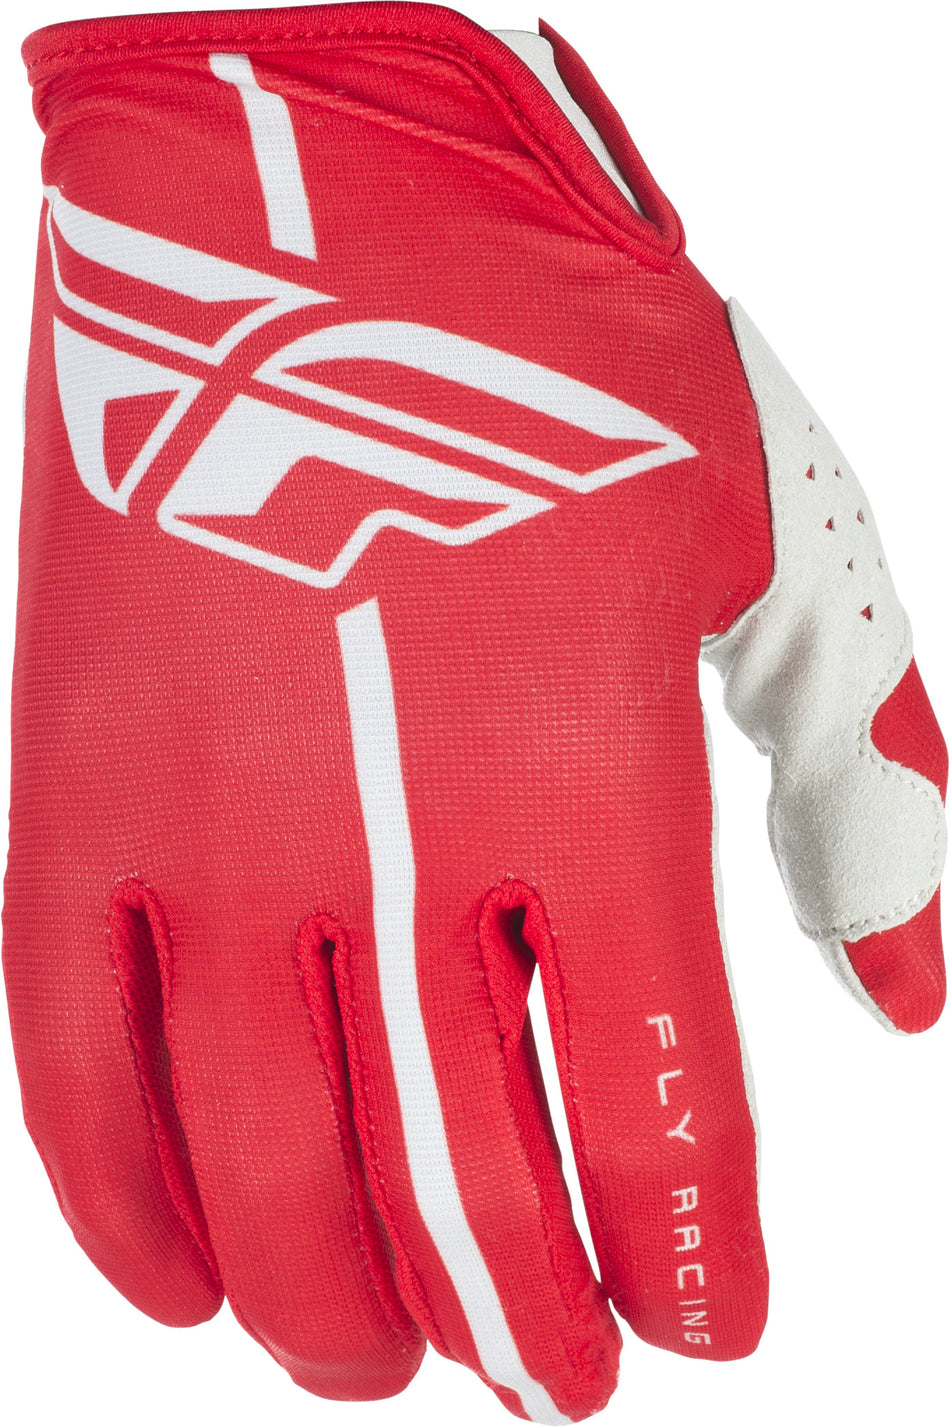 FLY RACING Lite Gloves Red/Grey Sz 11 371-01211